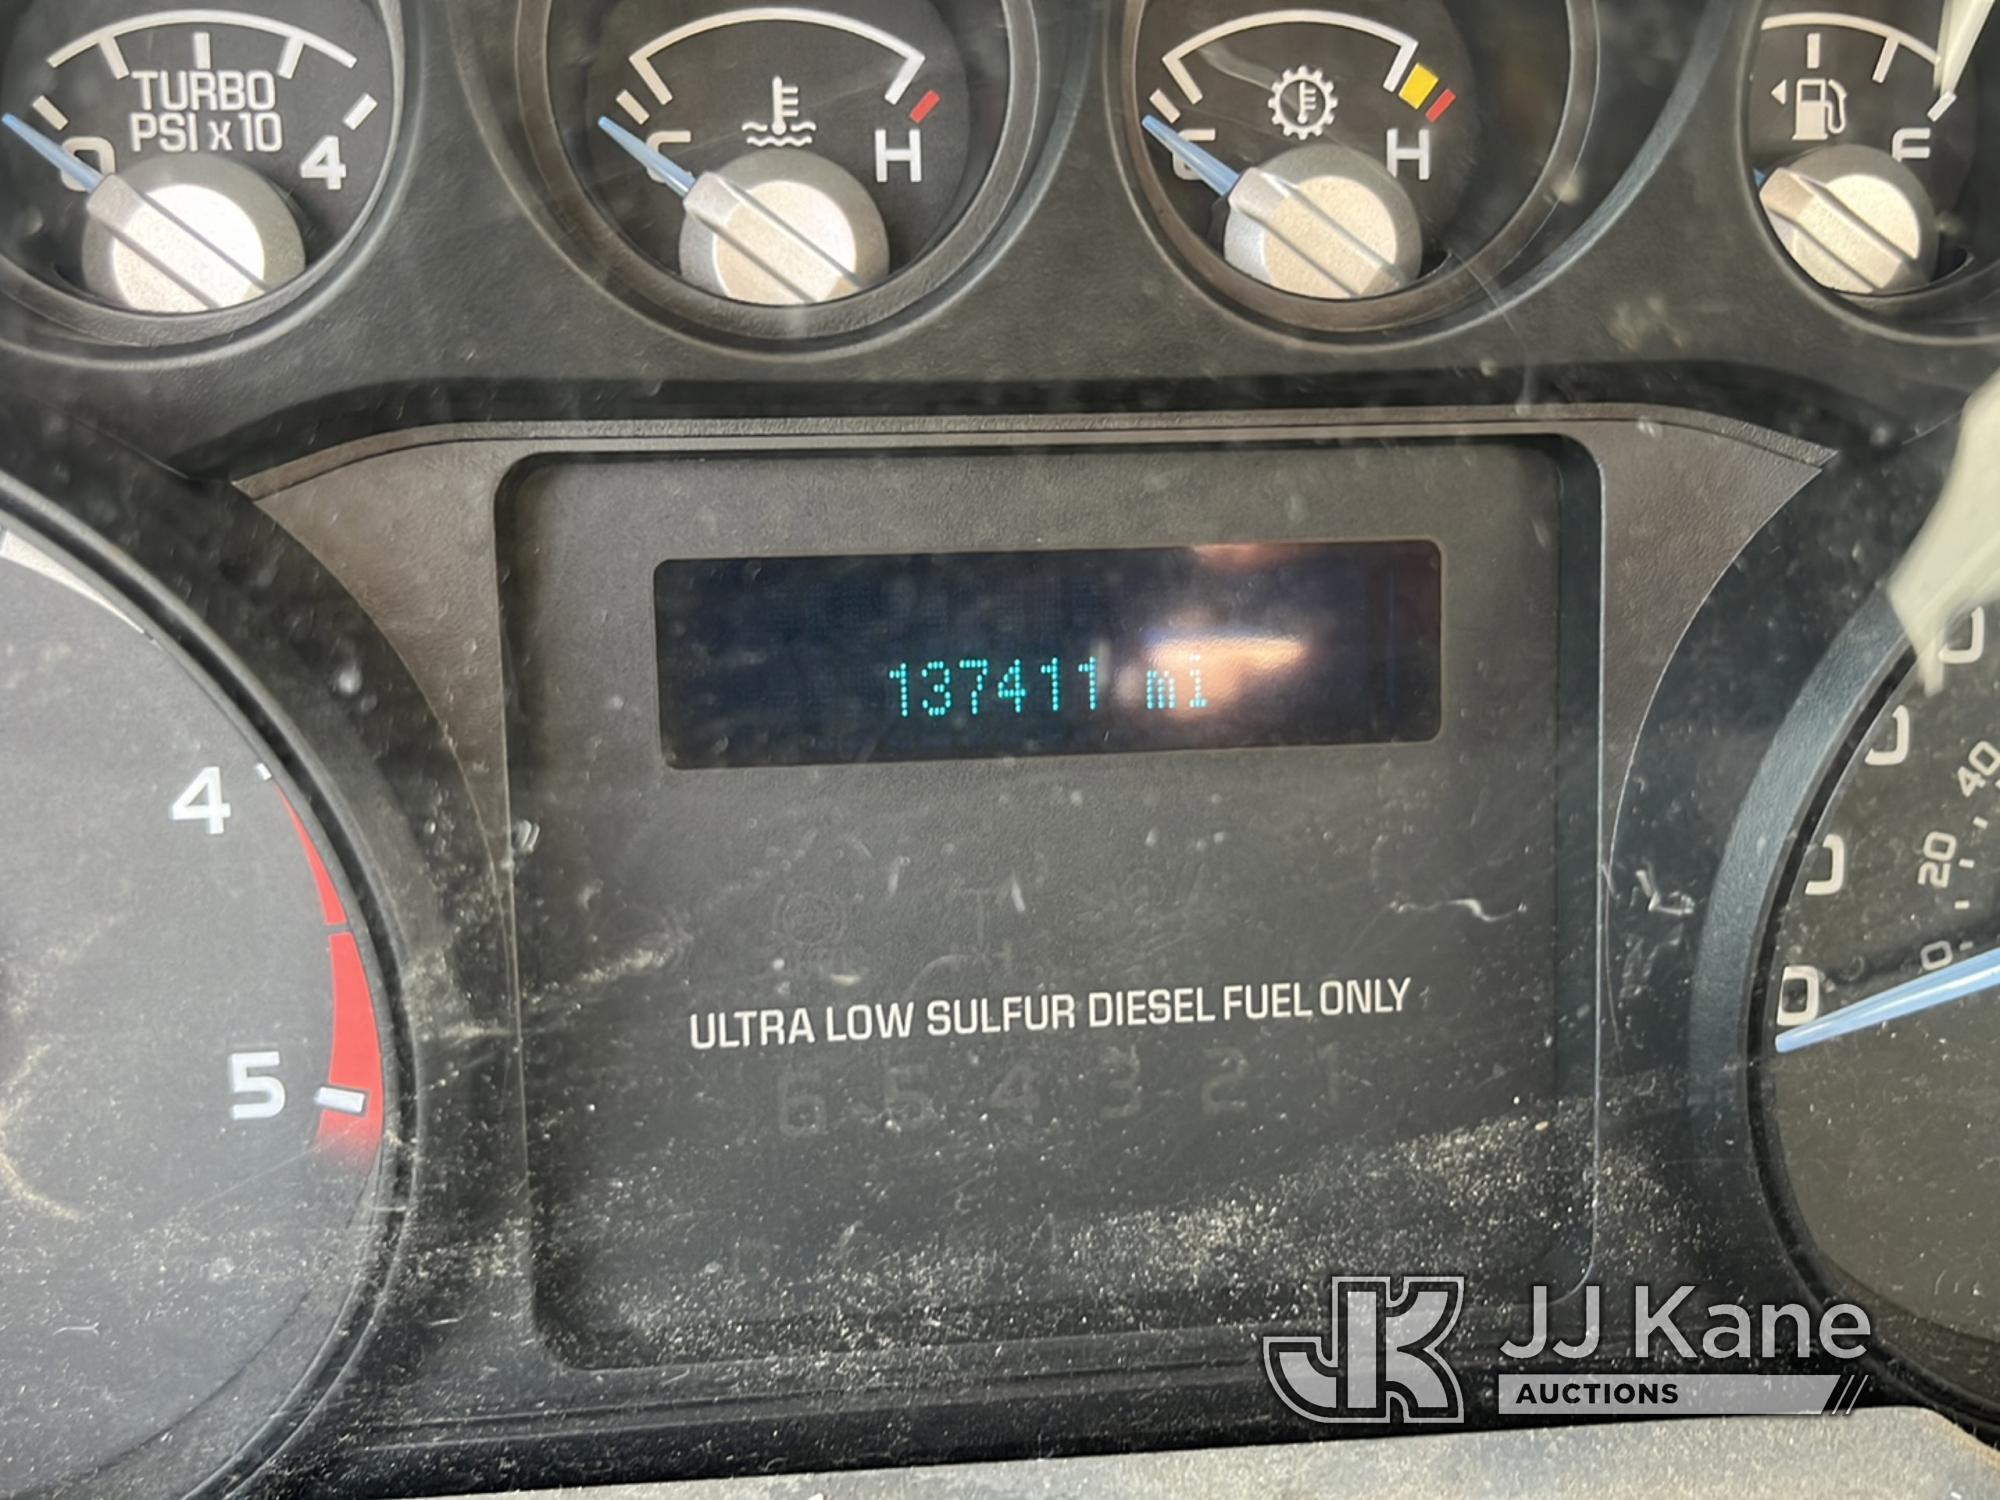 (Robert, LA) 2012 Ford F550 Enclosed High-Top Service Truck Not Running, Condition Unknown, Dead Bat